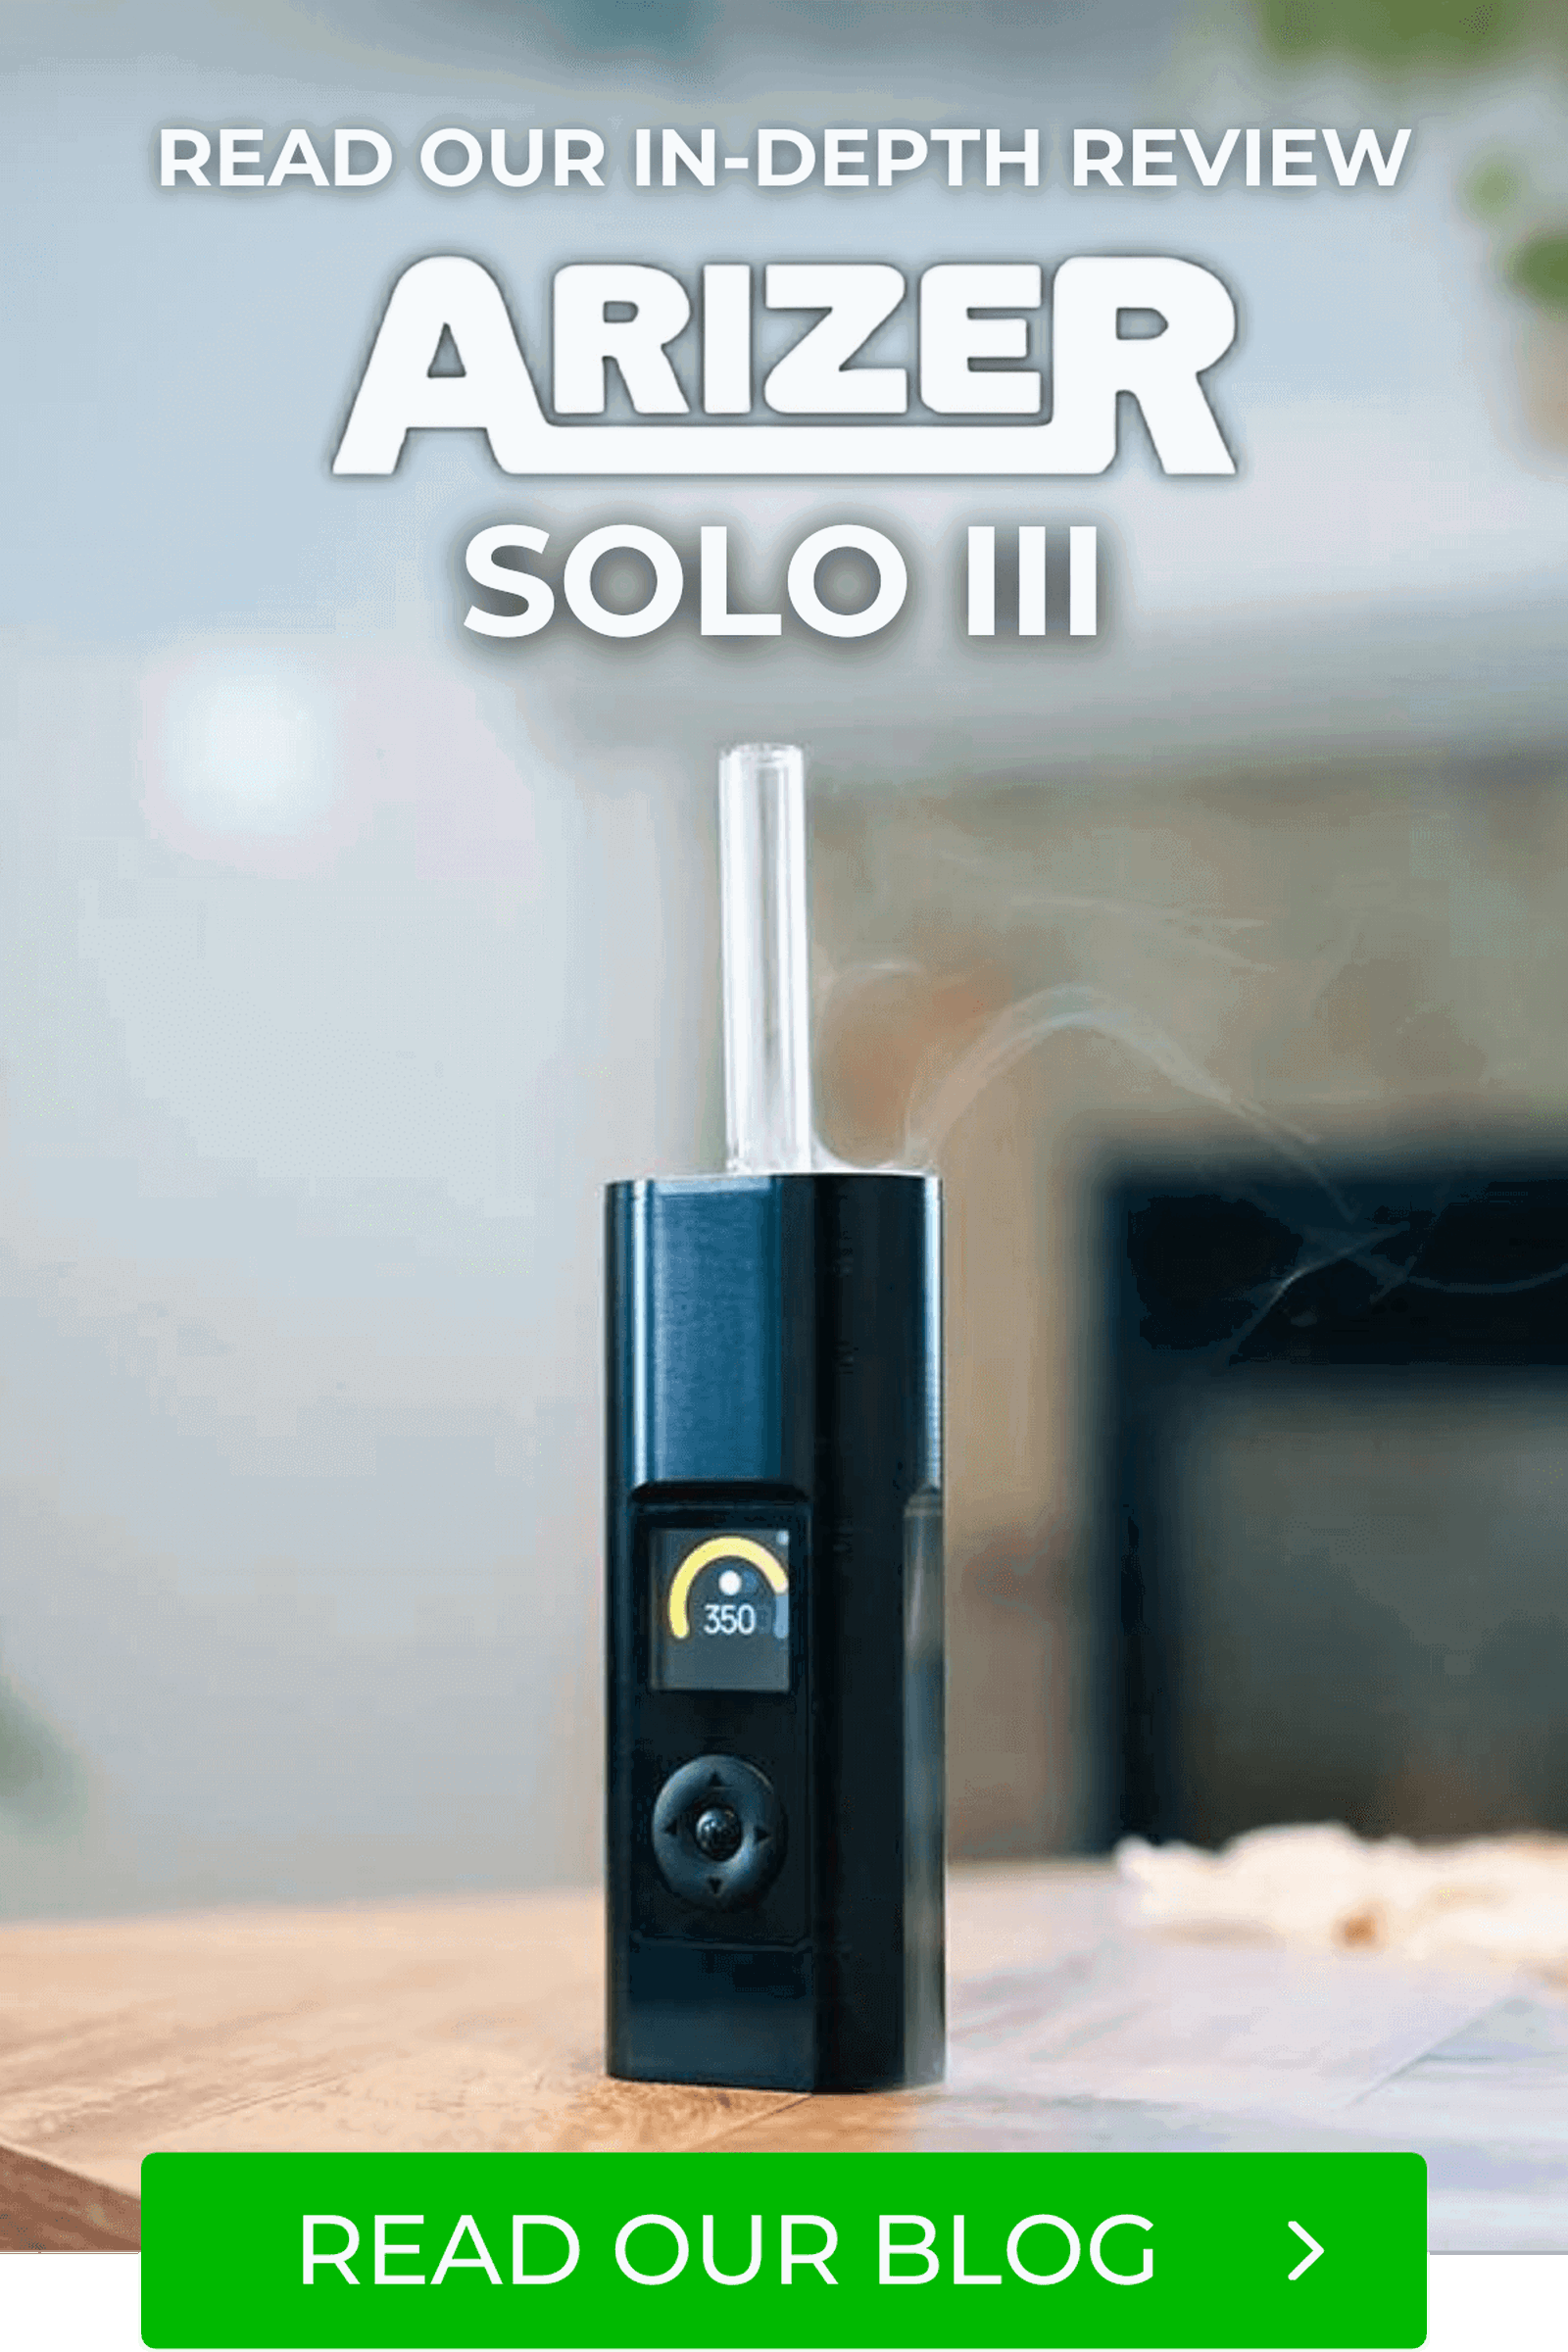 Arizer Solo 3: Read our in-depth review here!